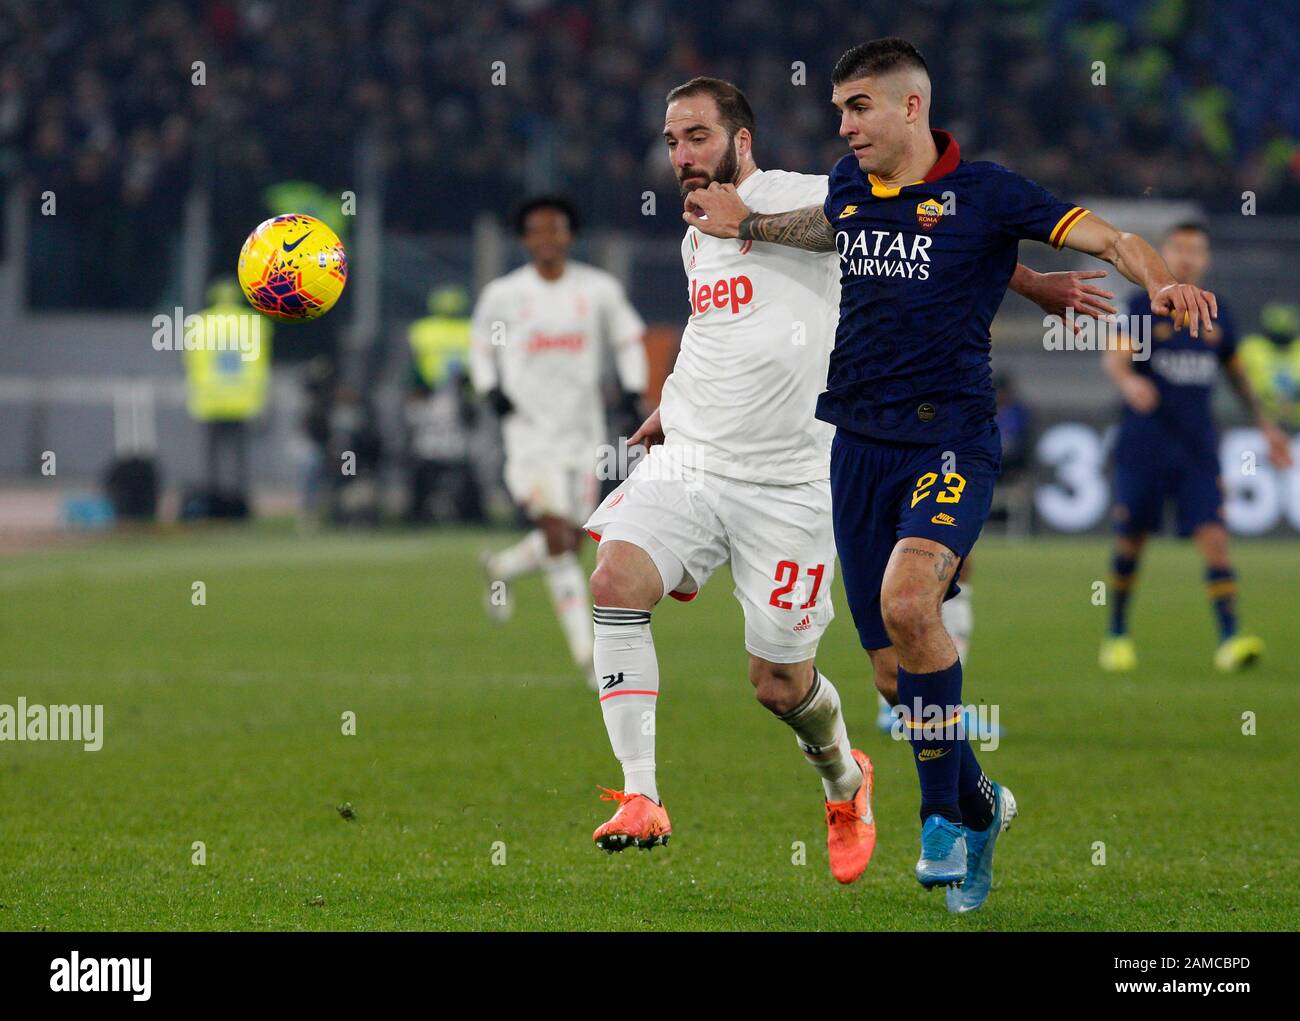 Rome, Italy, 12th January, 2020. Juventus' Gonzalo Higuain, right, is challenged by Roma s Gianluca Mancini during the Serie A soccer match between Roma and Juventus at the Olympic Stadium. Juventus won 2-1. Credit Riccardo De Luca - UPDATE IMAGES / Alamy Live News Stock Photo